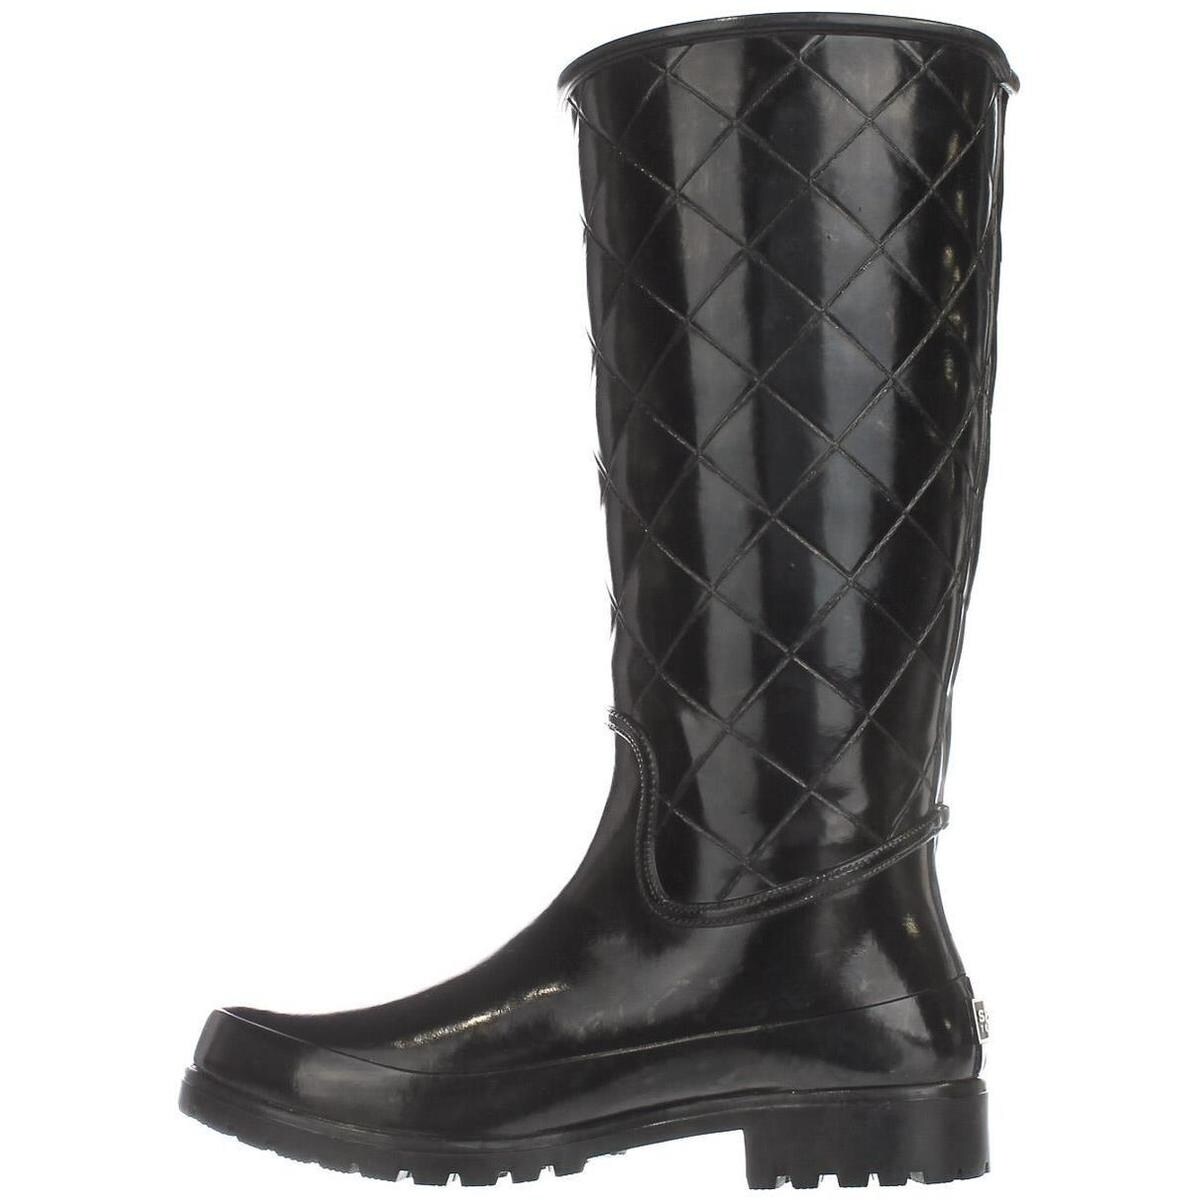 sperry pelican quilted rain boots